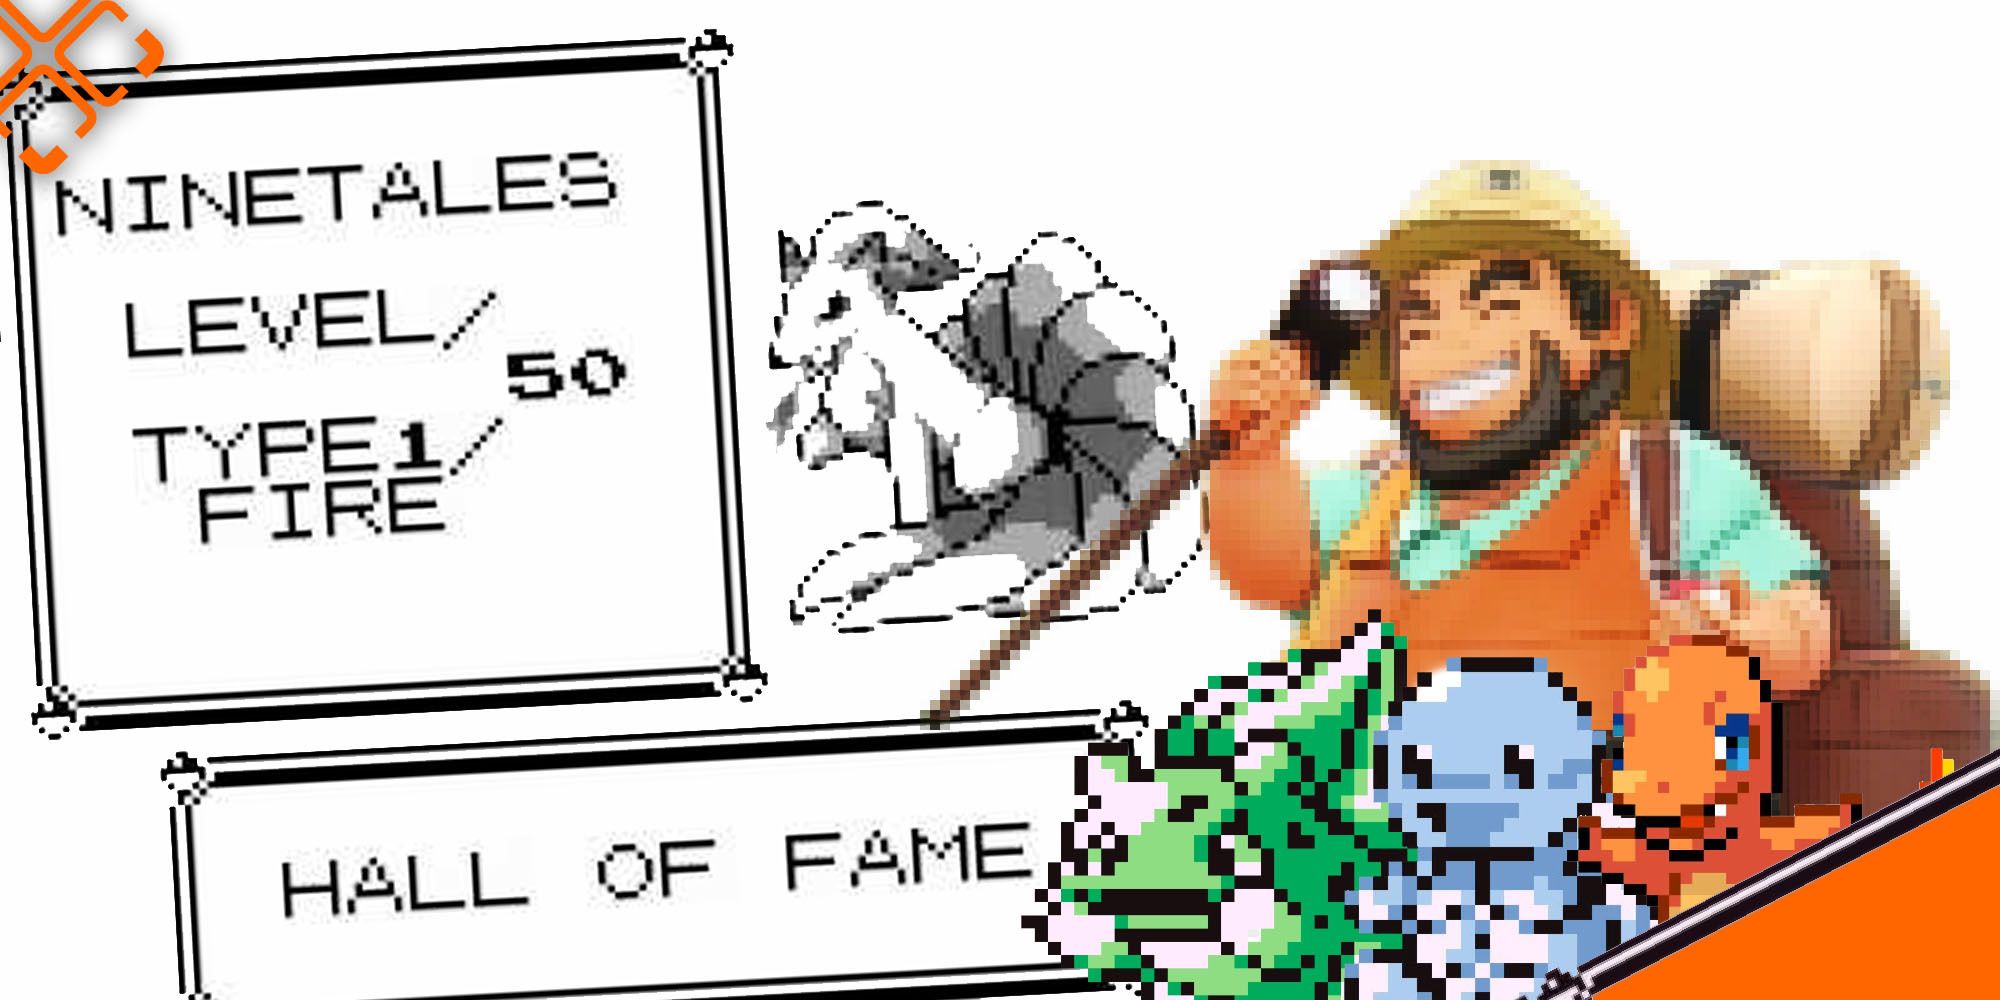 revisiting kanto - hall of fame pc behind the kanto template